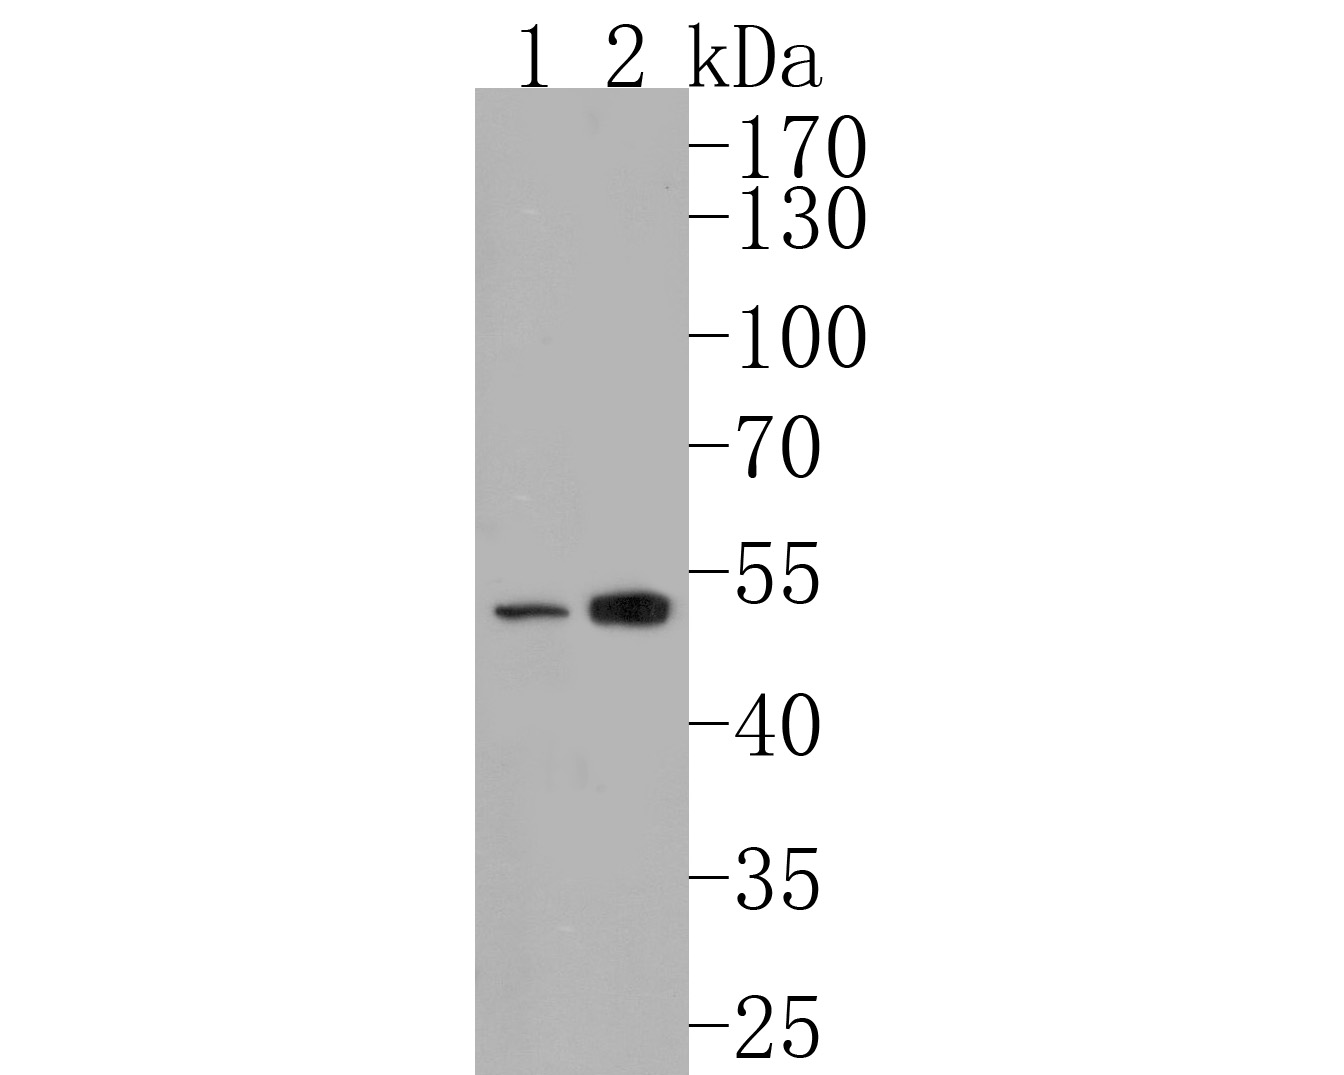 Western blot analysis of ZPR1 on different lysates. Proteins were transferred to a PVDF membrane and blocked with 5% BSA in PBS for 1 hour at room temperature. The primary antibody (HA720026, 1/500) was used in 5% BSA at room temperature for 2 hours. Goat Anti-Rabbit IgG - HRP Secondary Antibody (HA1001) at 1:200,000 dilution was used for 1 hour at room temperature.<br />
Positive control: <br />
Lane 1: HepG2 cell lysate<br />
Lane 2: Jurkat cell lysate